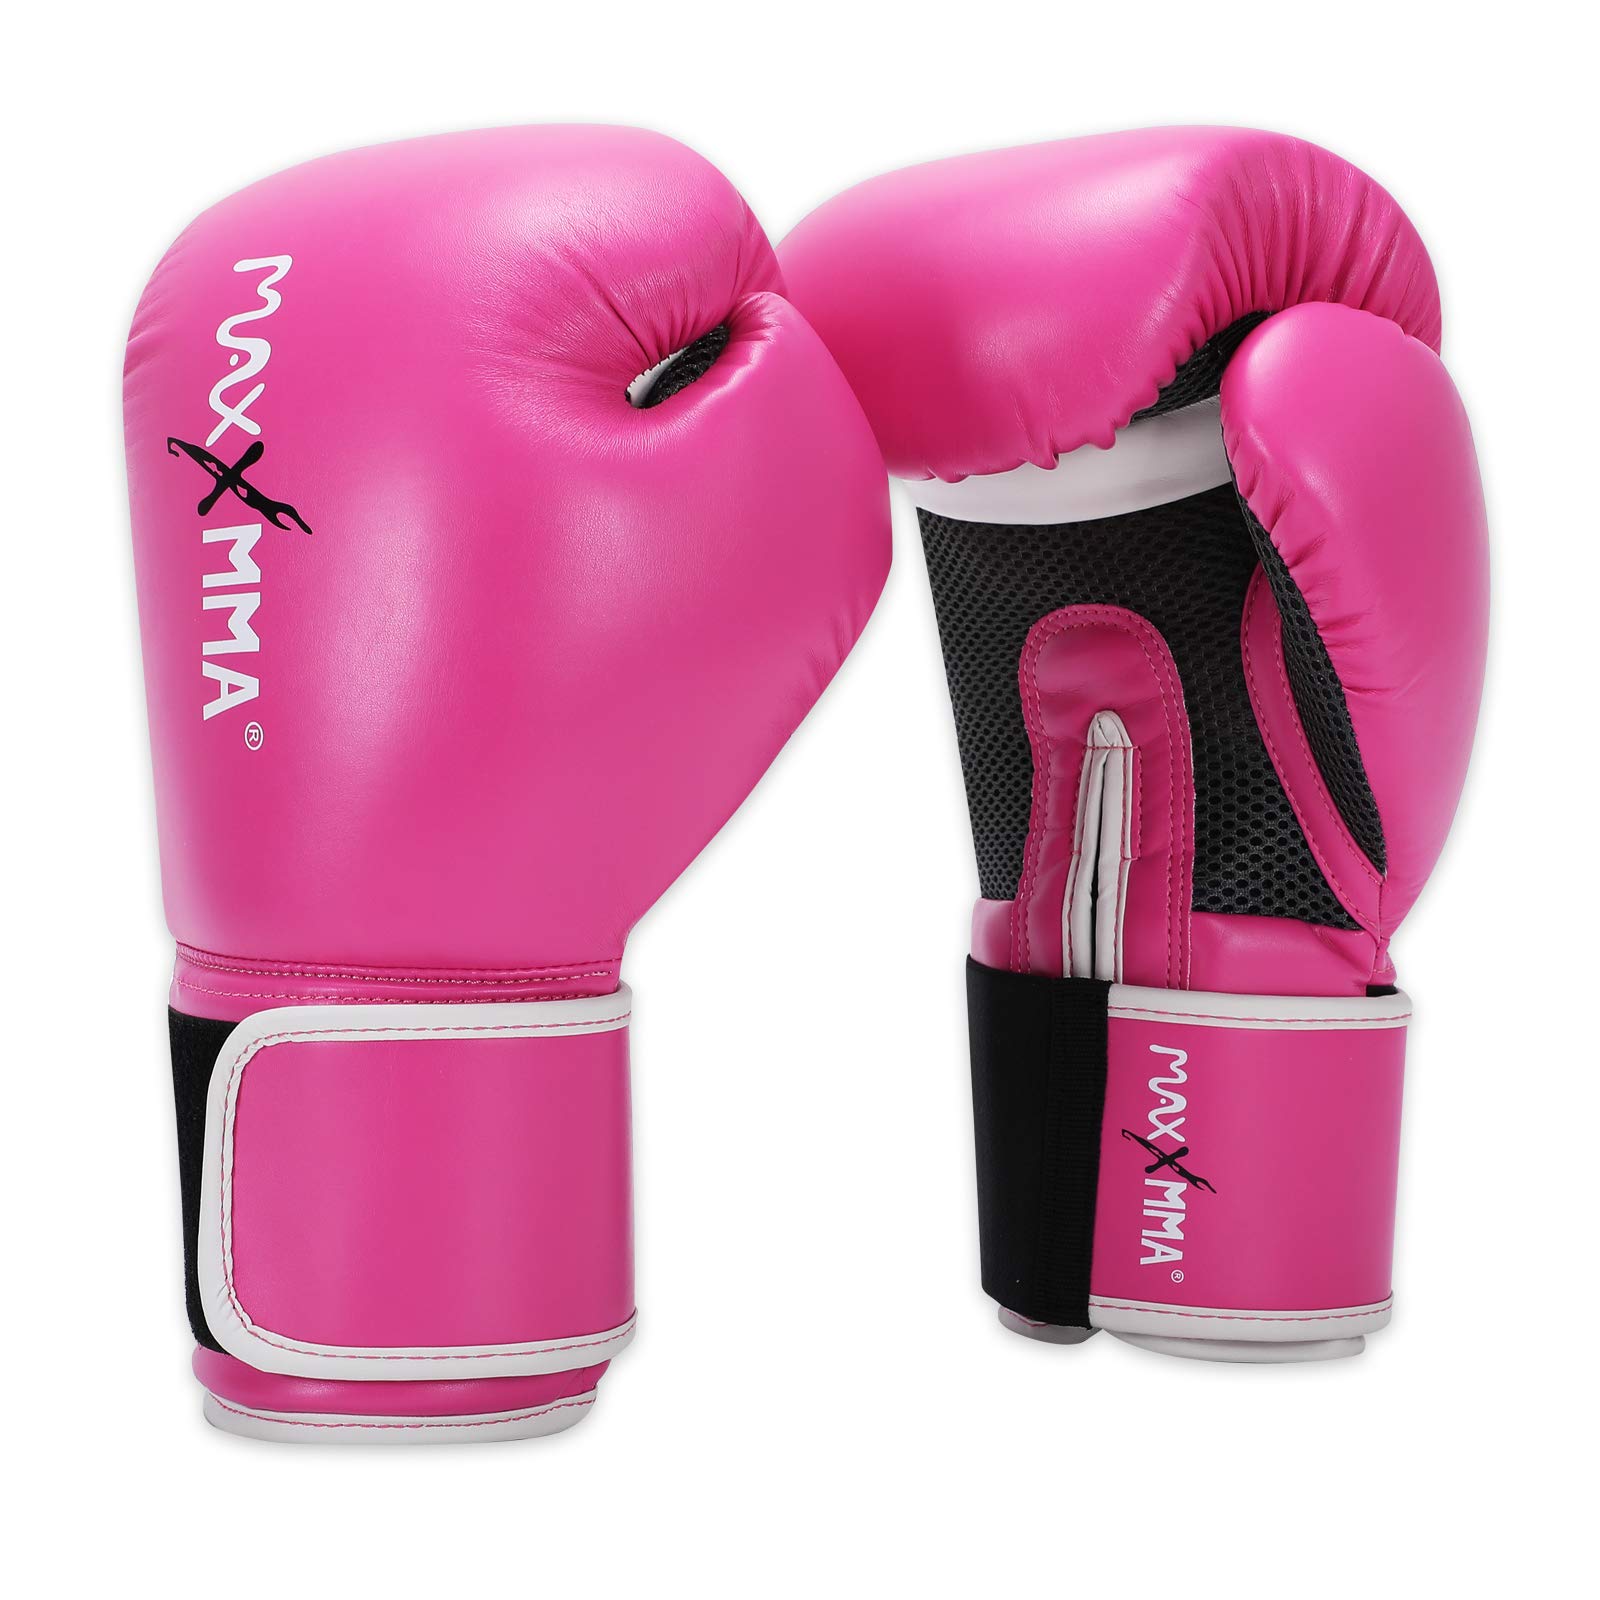 MaxxMMA Pro Style Boxing Gloves for Men & Women, Training Heavy Bag Workout  Mitts Muay Thai Sparring Kickboxing Punching Bagwork Fight Gloves Pink 10  oz.